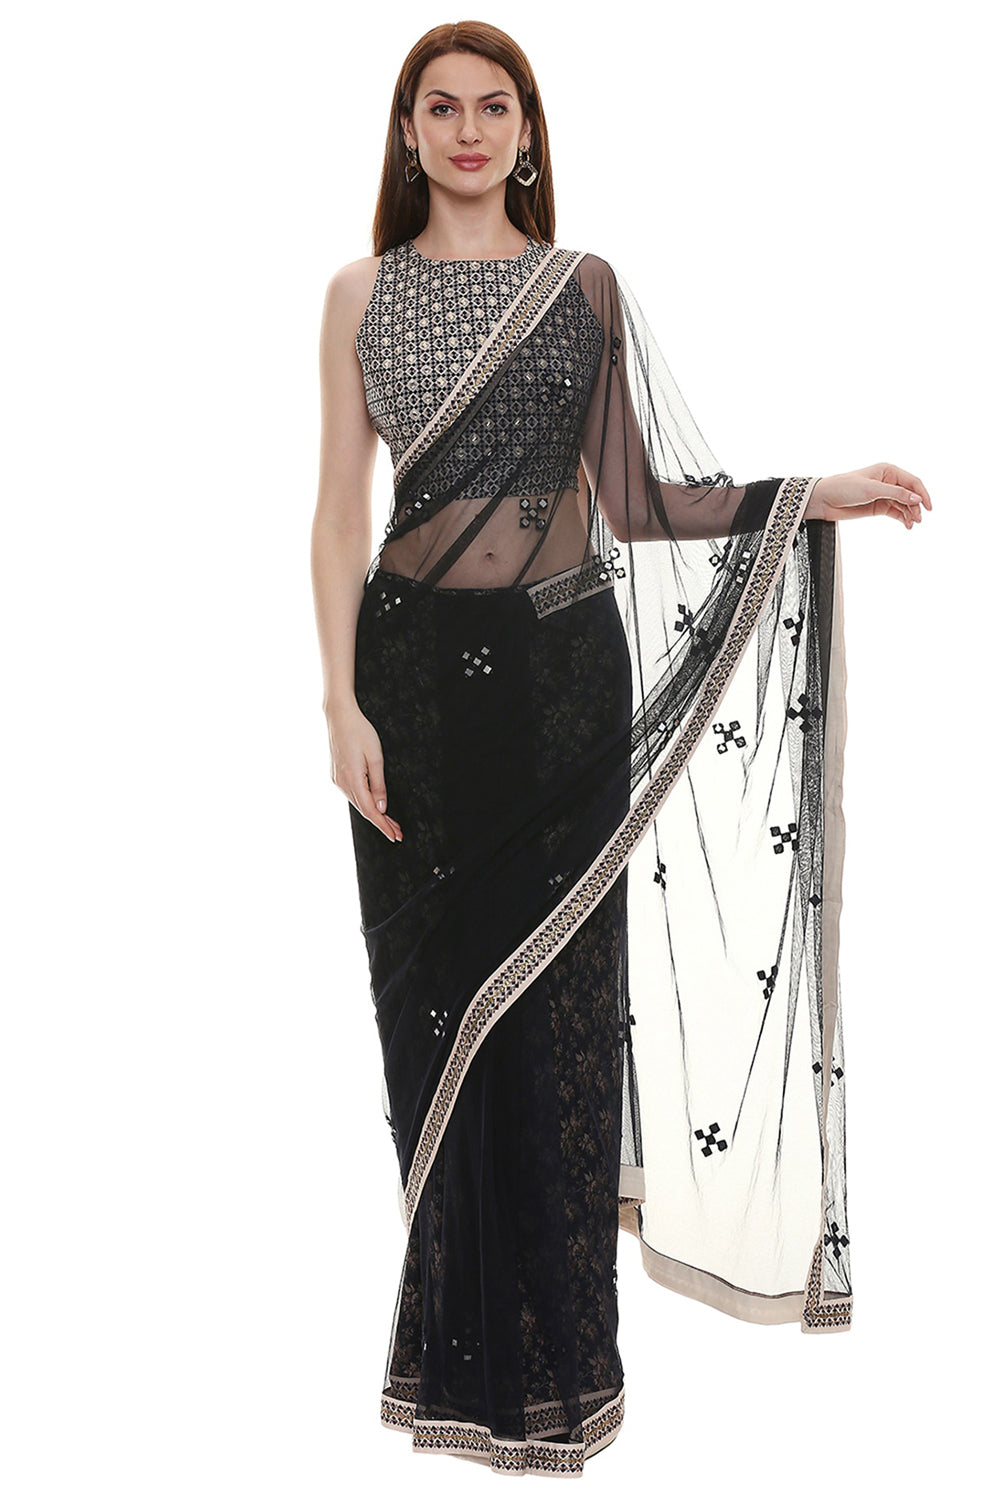 Applique Printed Saree With Blouse